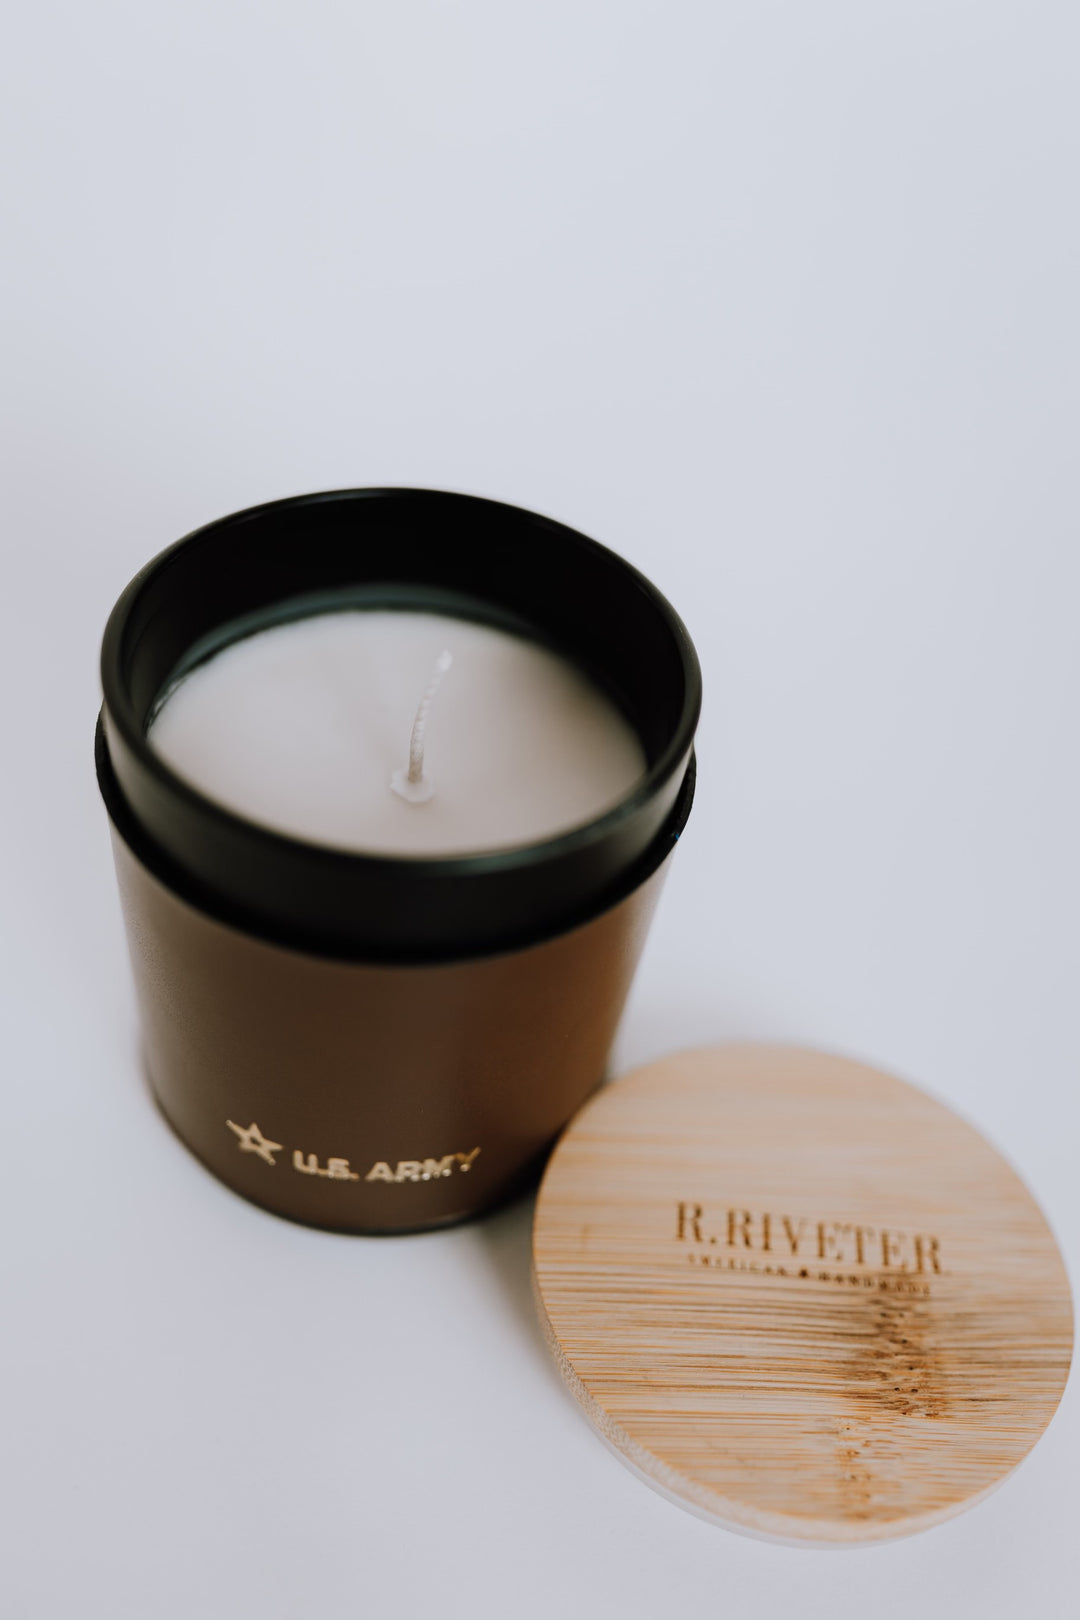 Leather Wrapped Candle | U.S. ARMY Signature Riveter Brown Leather